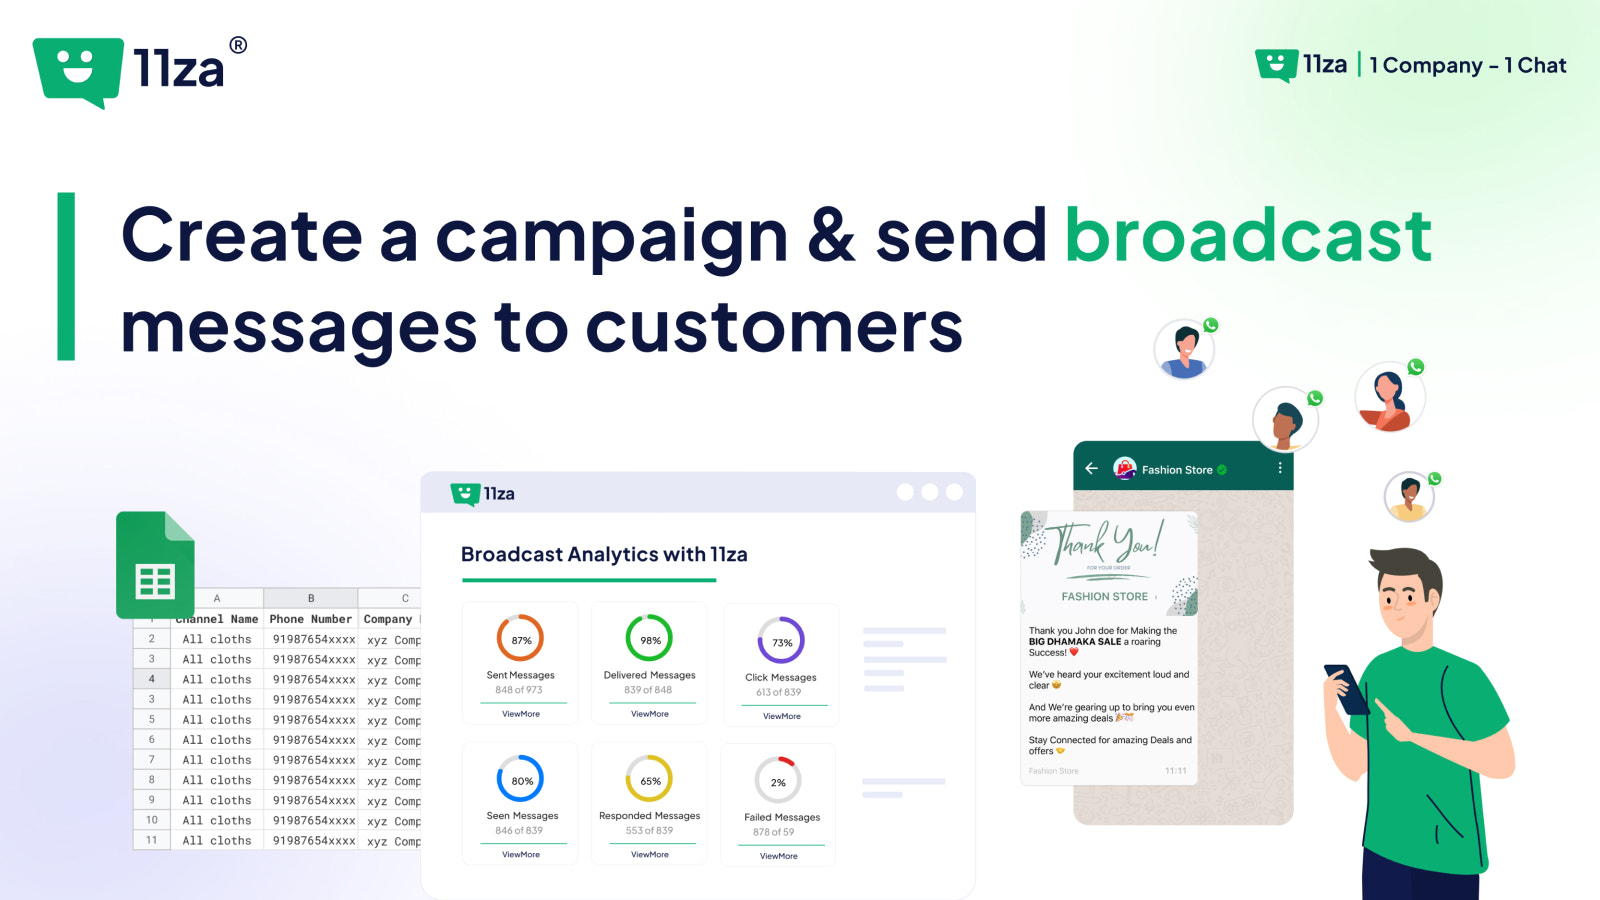 Launch Campaign & Broadcast Messages to Customers.